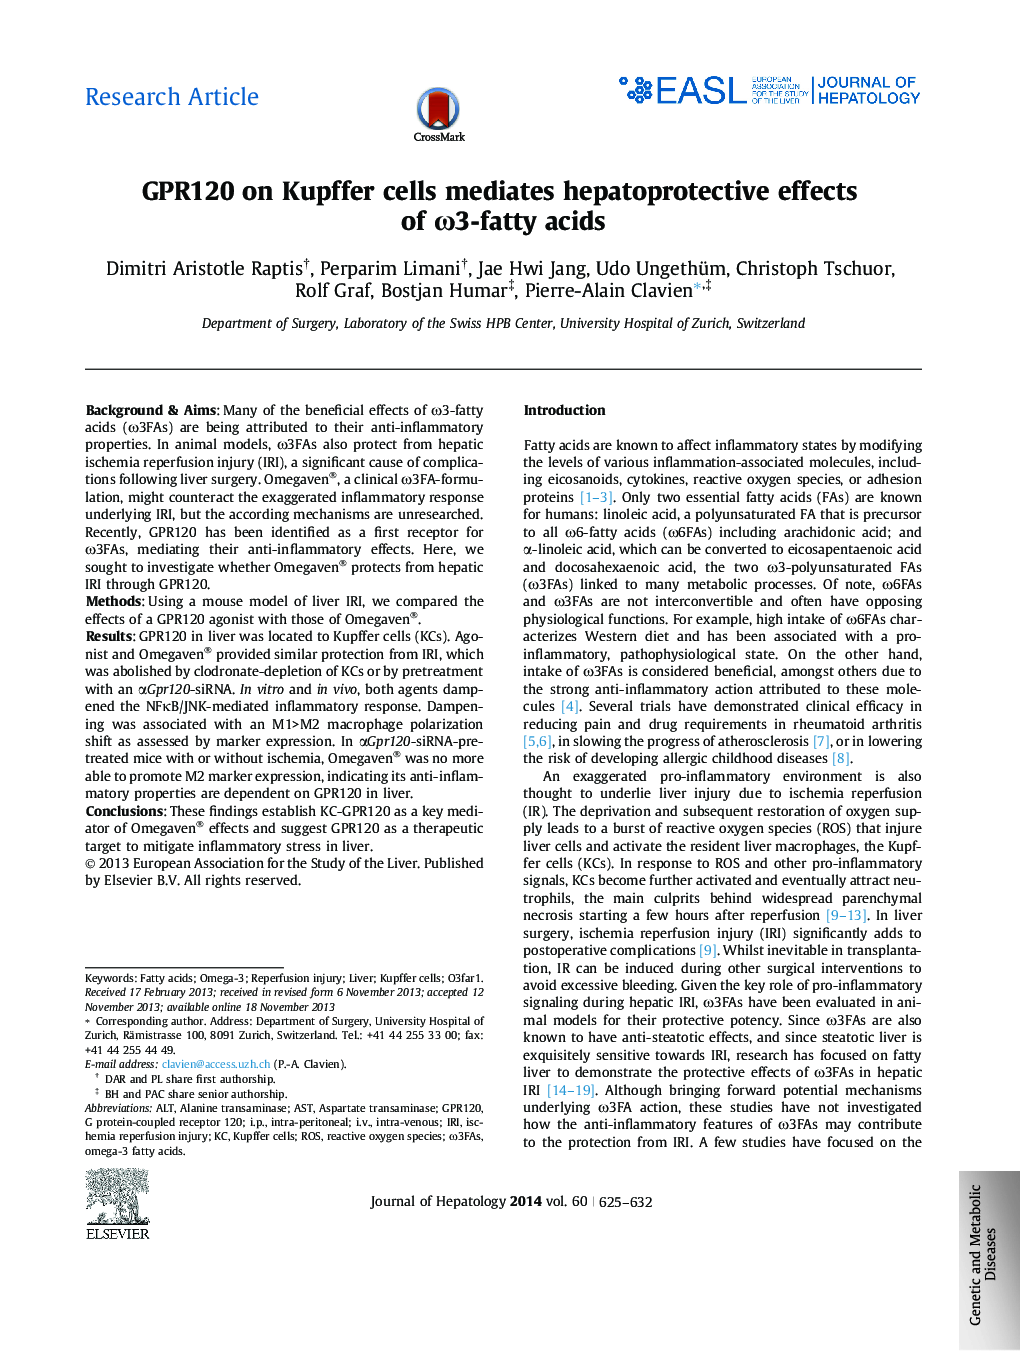 Research ArticleGPR120 on Kupffer cells mediates hepatoprotective effects of Ï3-fatty acids